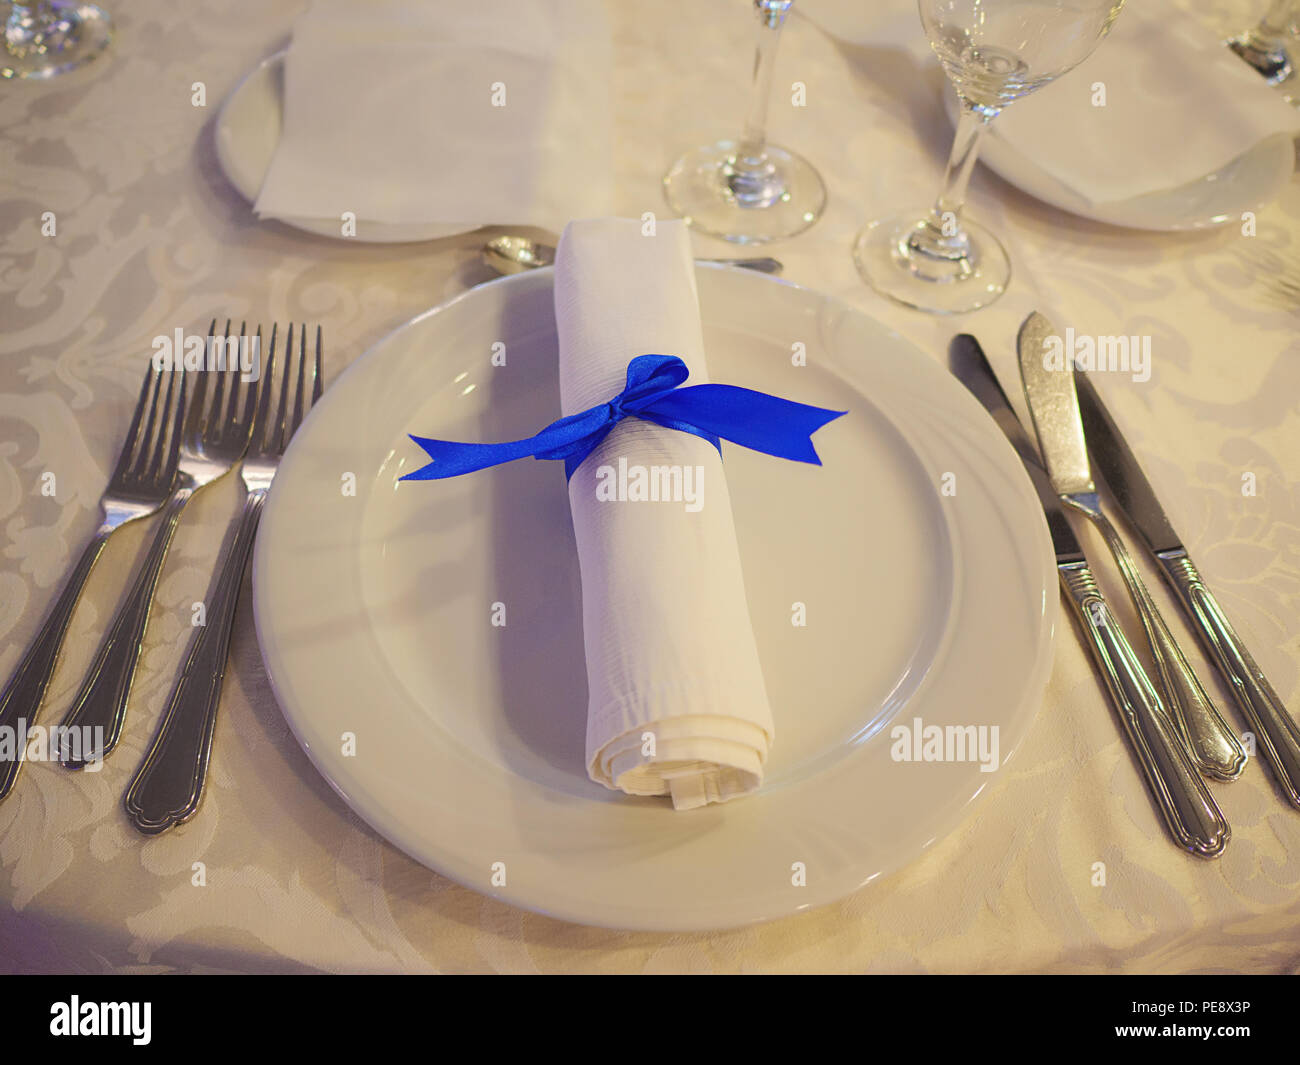 https://c8.alamy.com/comp/PE8X3P/table-setting-for-formal-event-elegant-dining-or-a-wedding-ready-for-guests-with-the-silverware-placed-in-the-order-of-use-and-napkin-PE8X3P.jpg